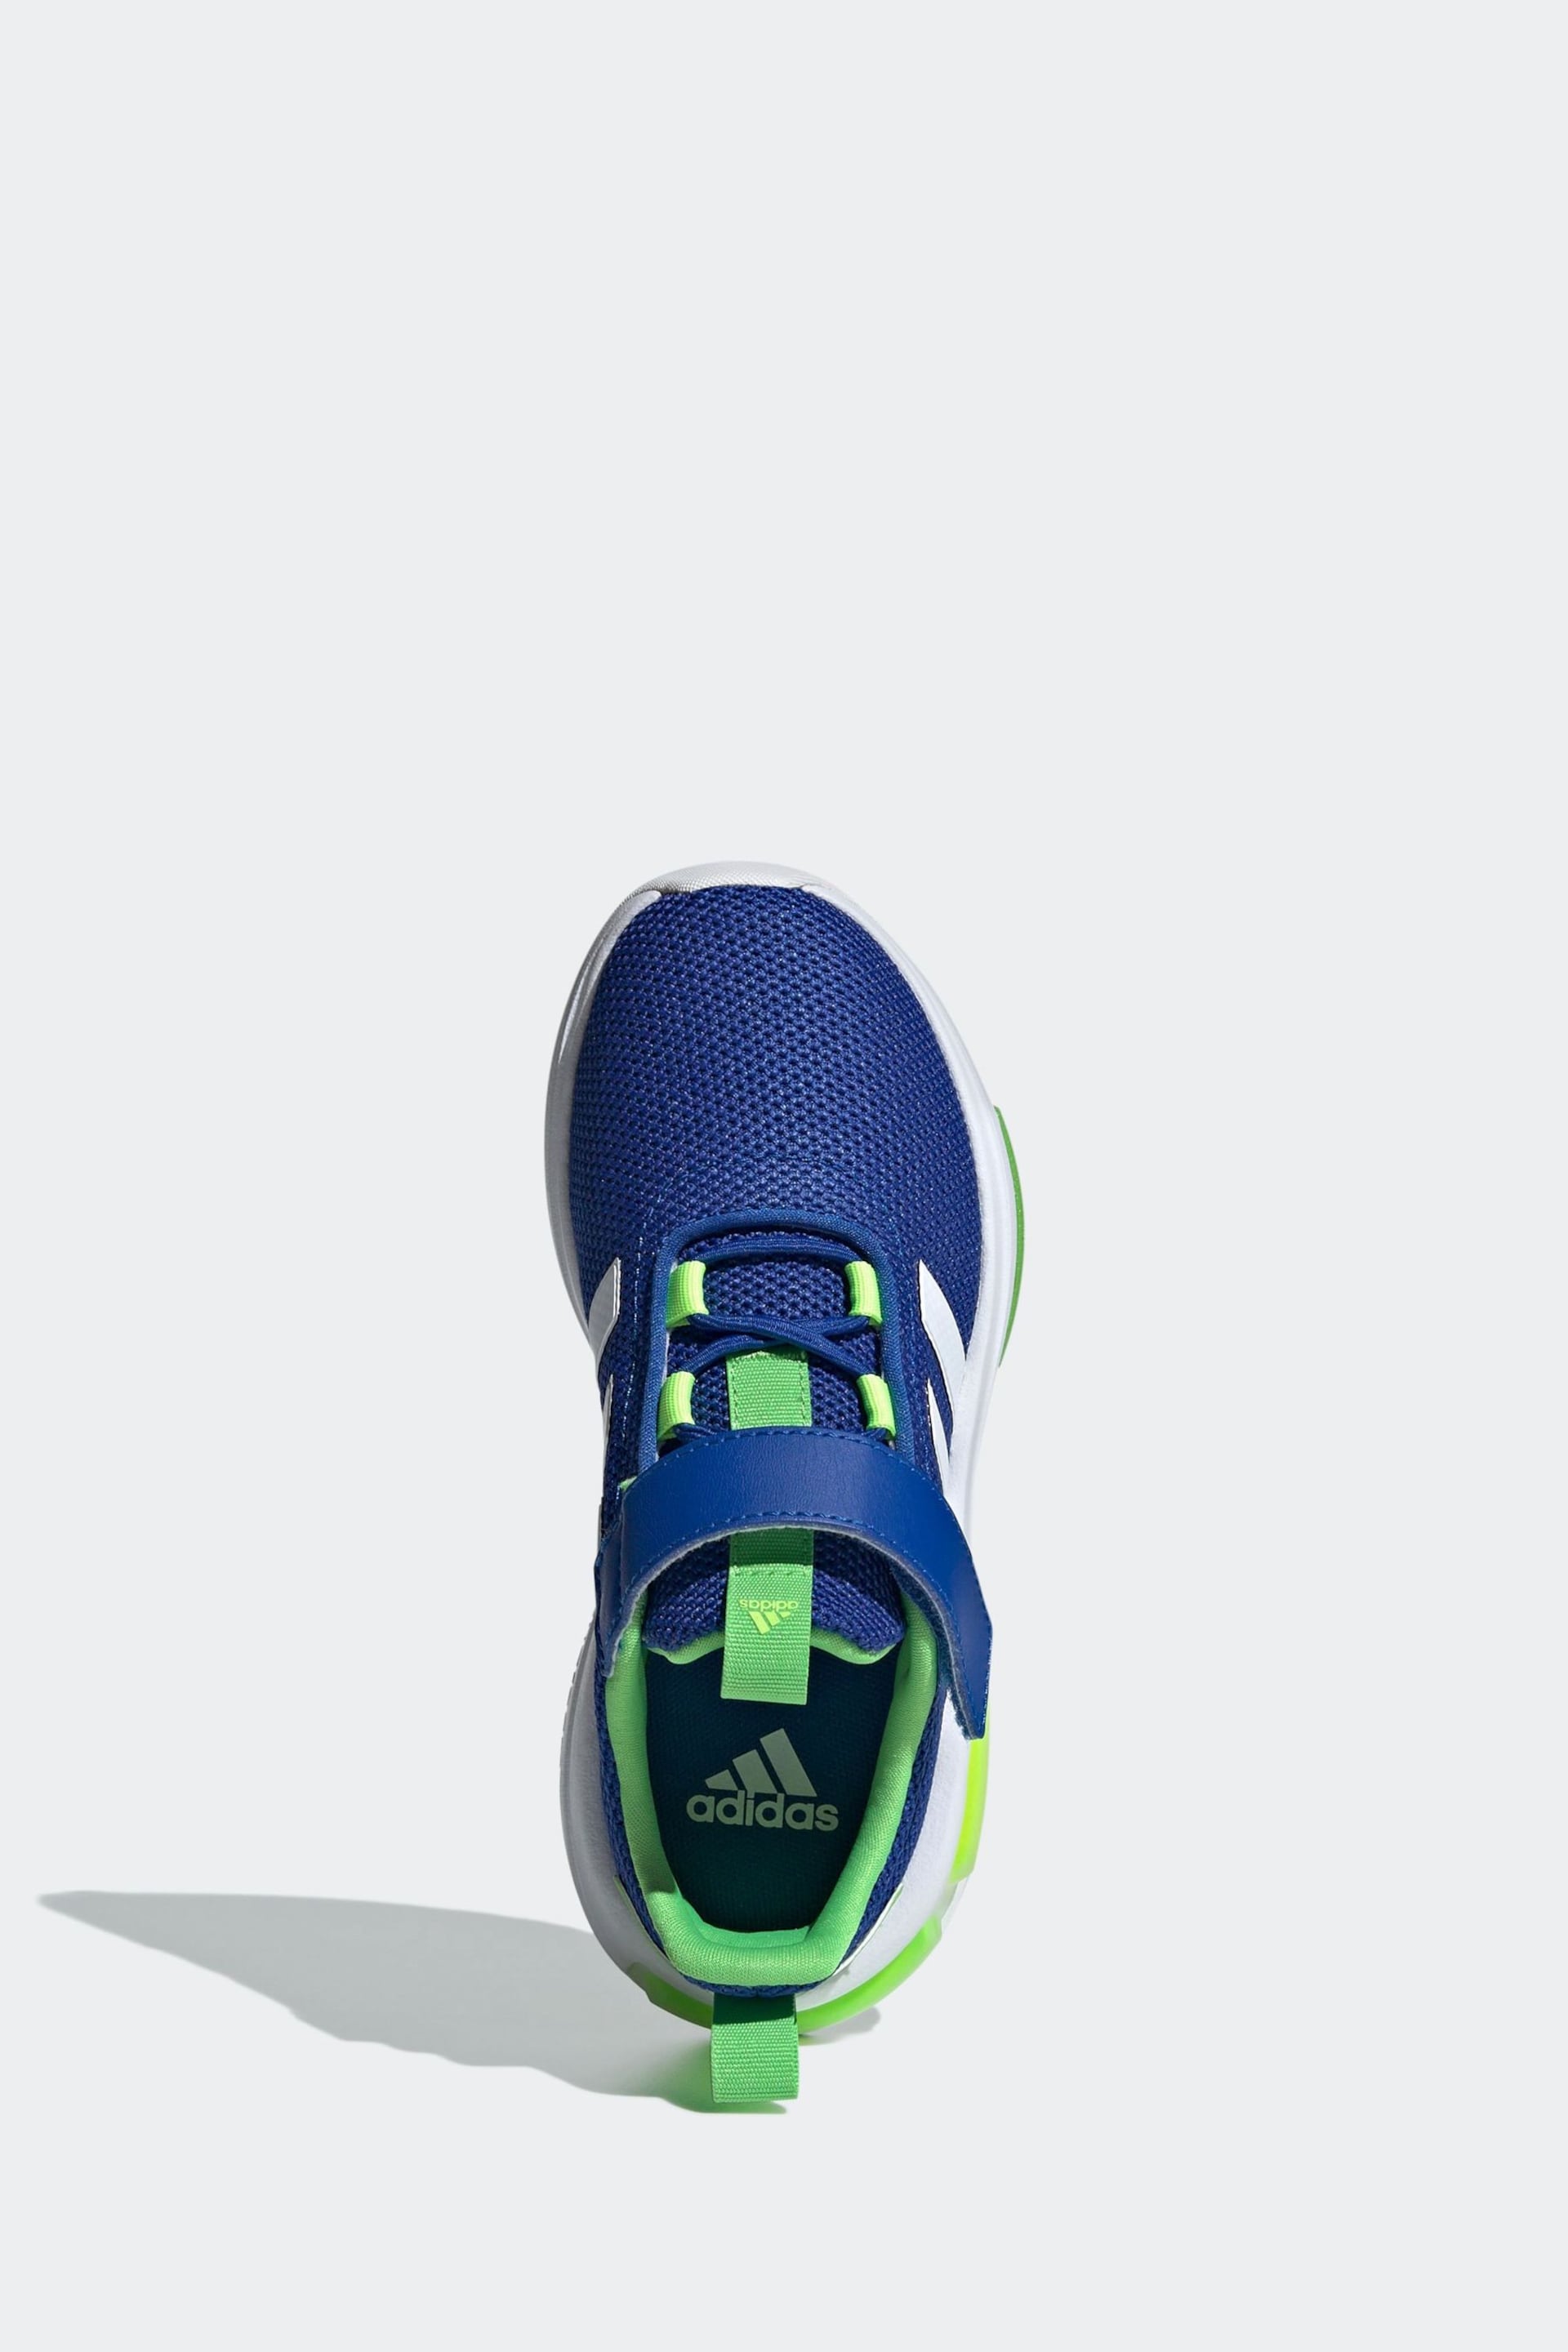 adidas Blue Kids Sportswear Racer TR23 Trainers - Image 5 of 8